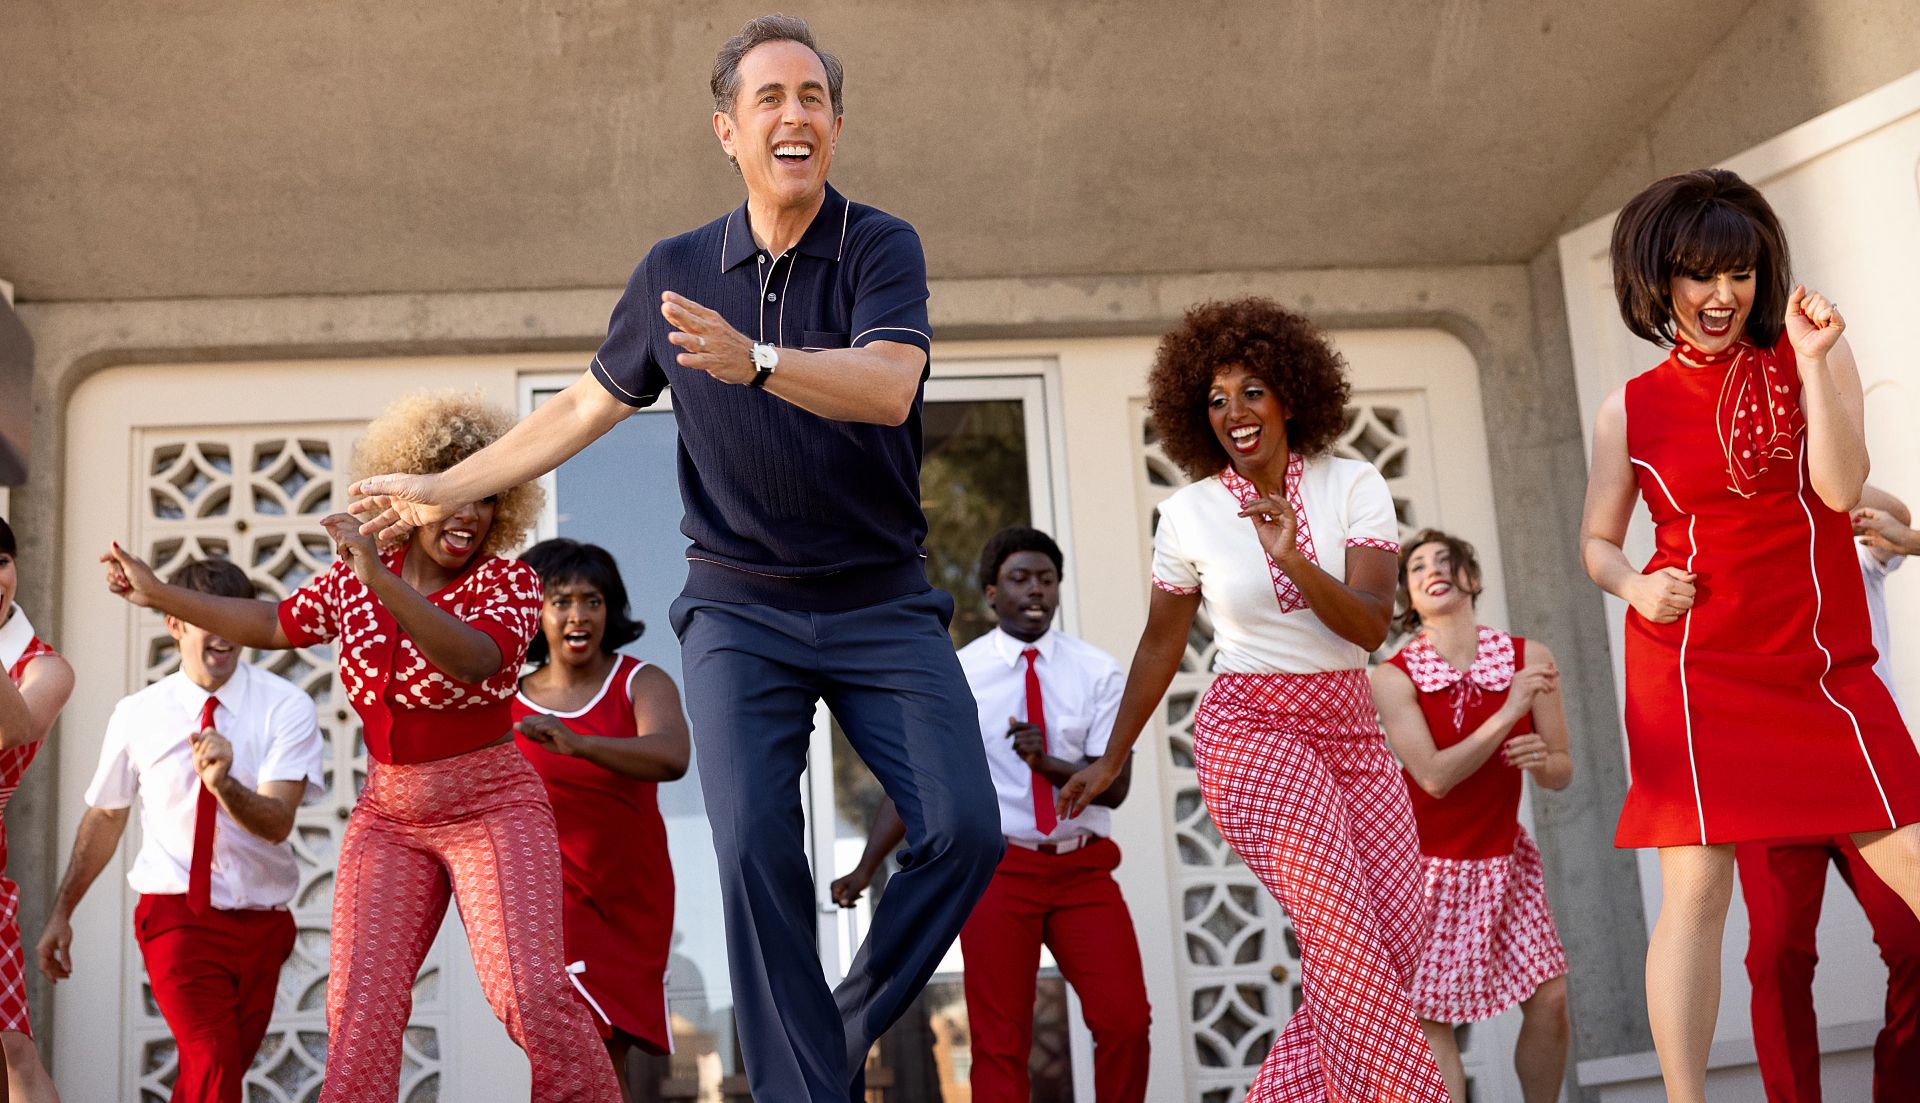 Jerry Seinfeld dancing with other people in a scene from Unfrosted